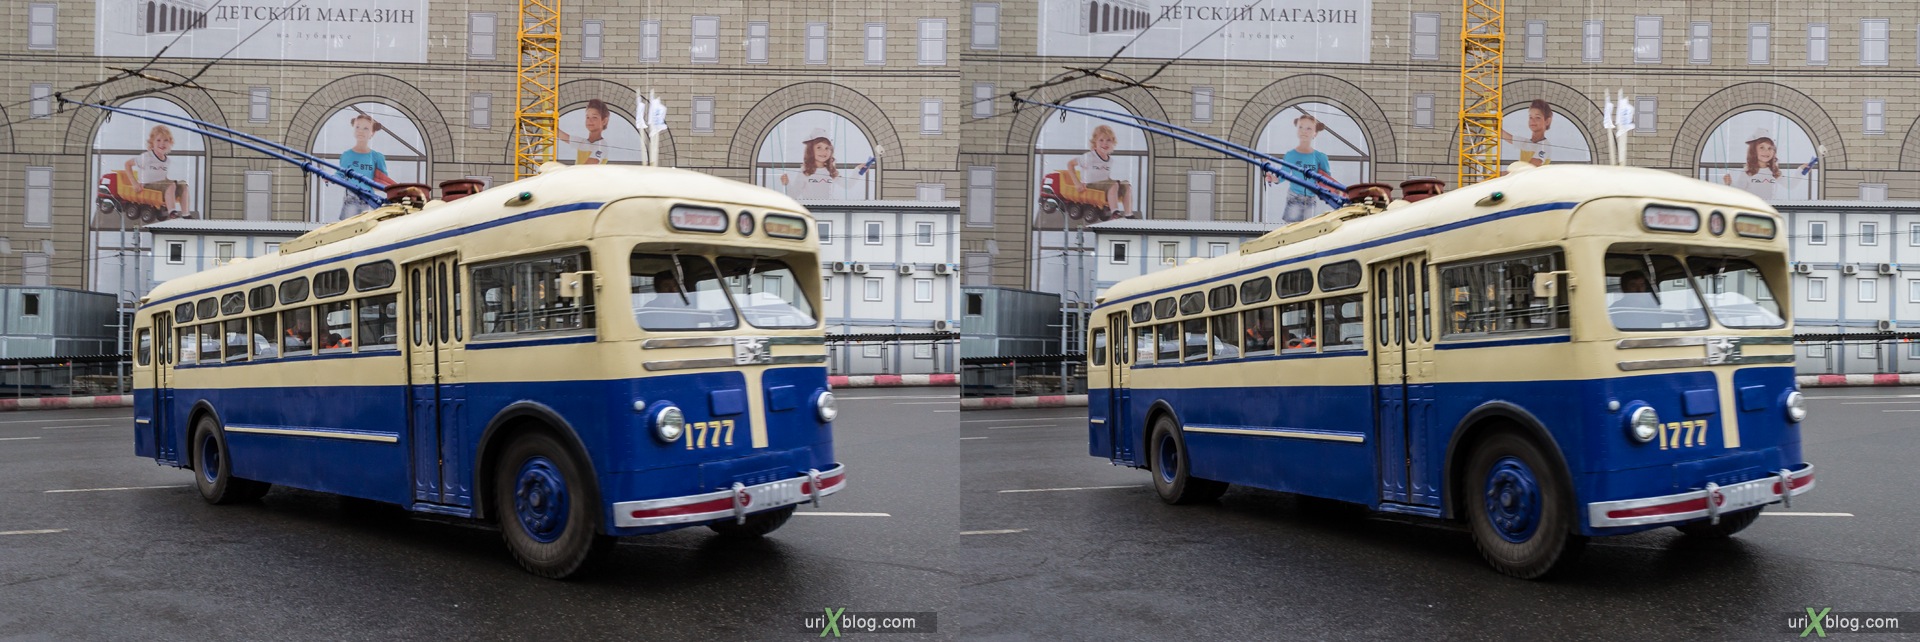 2013, Moscow, parade, old, ancient, trolleybus, street, Lubjanskaja square, 3D, stereo pair, cross-eyed, crossview, cross view stereo pair, stereoscopic